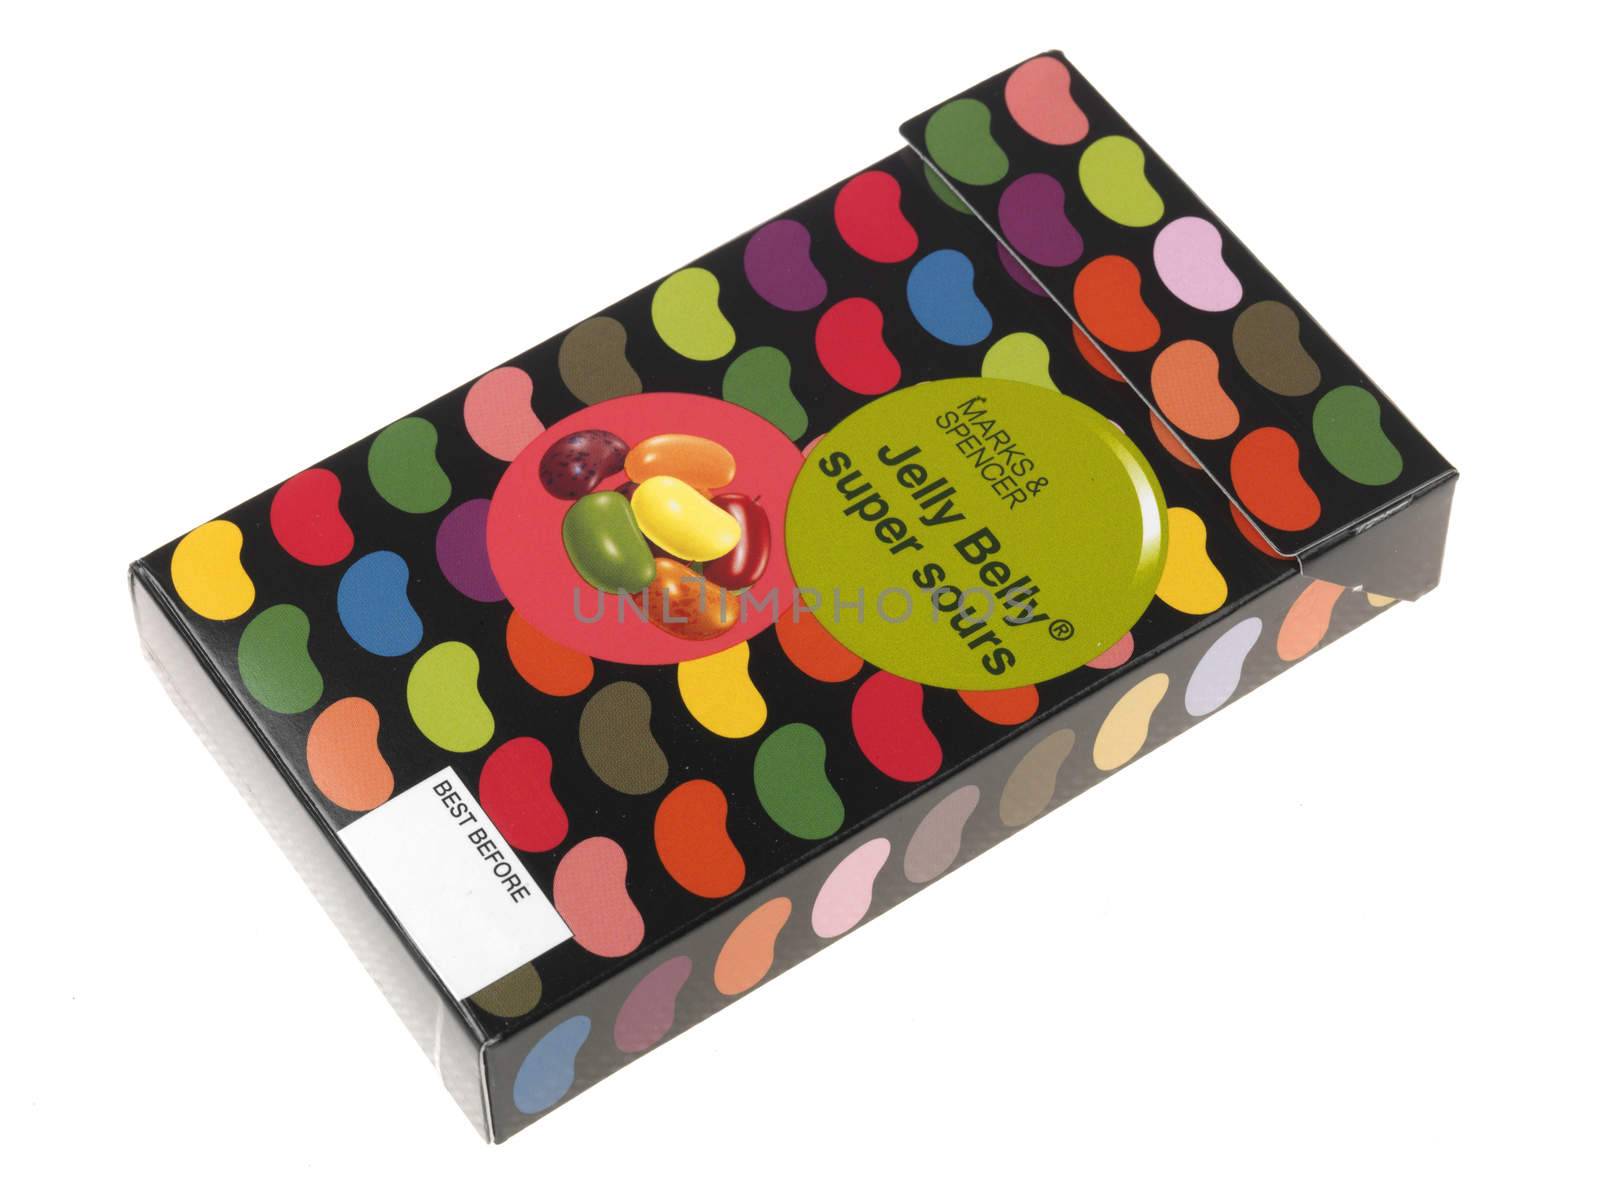 Box of Jelly Bellies by Whiteboxmedia